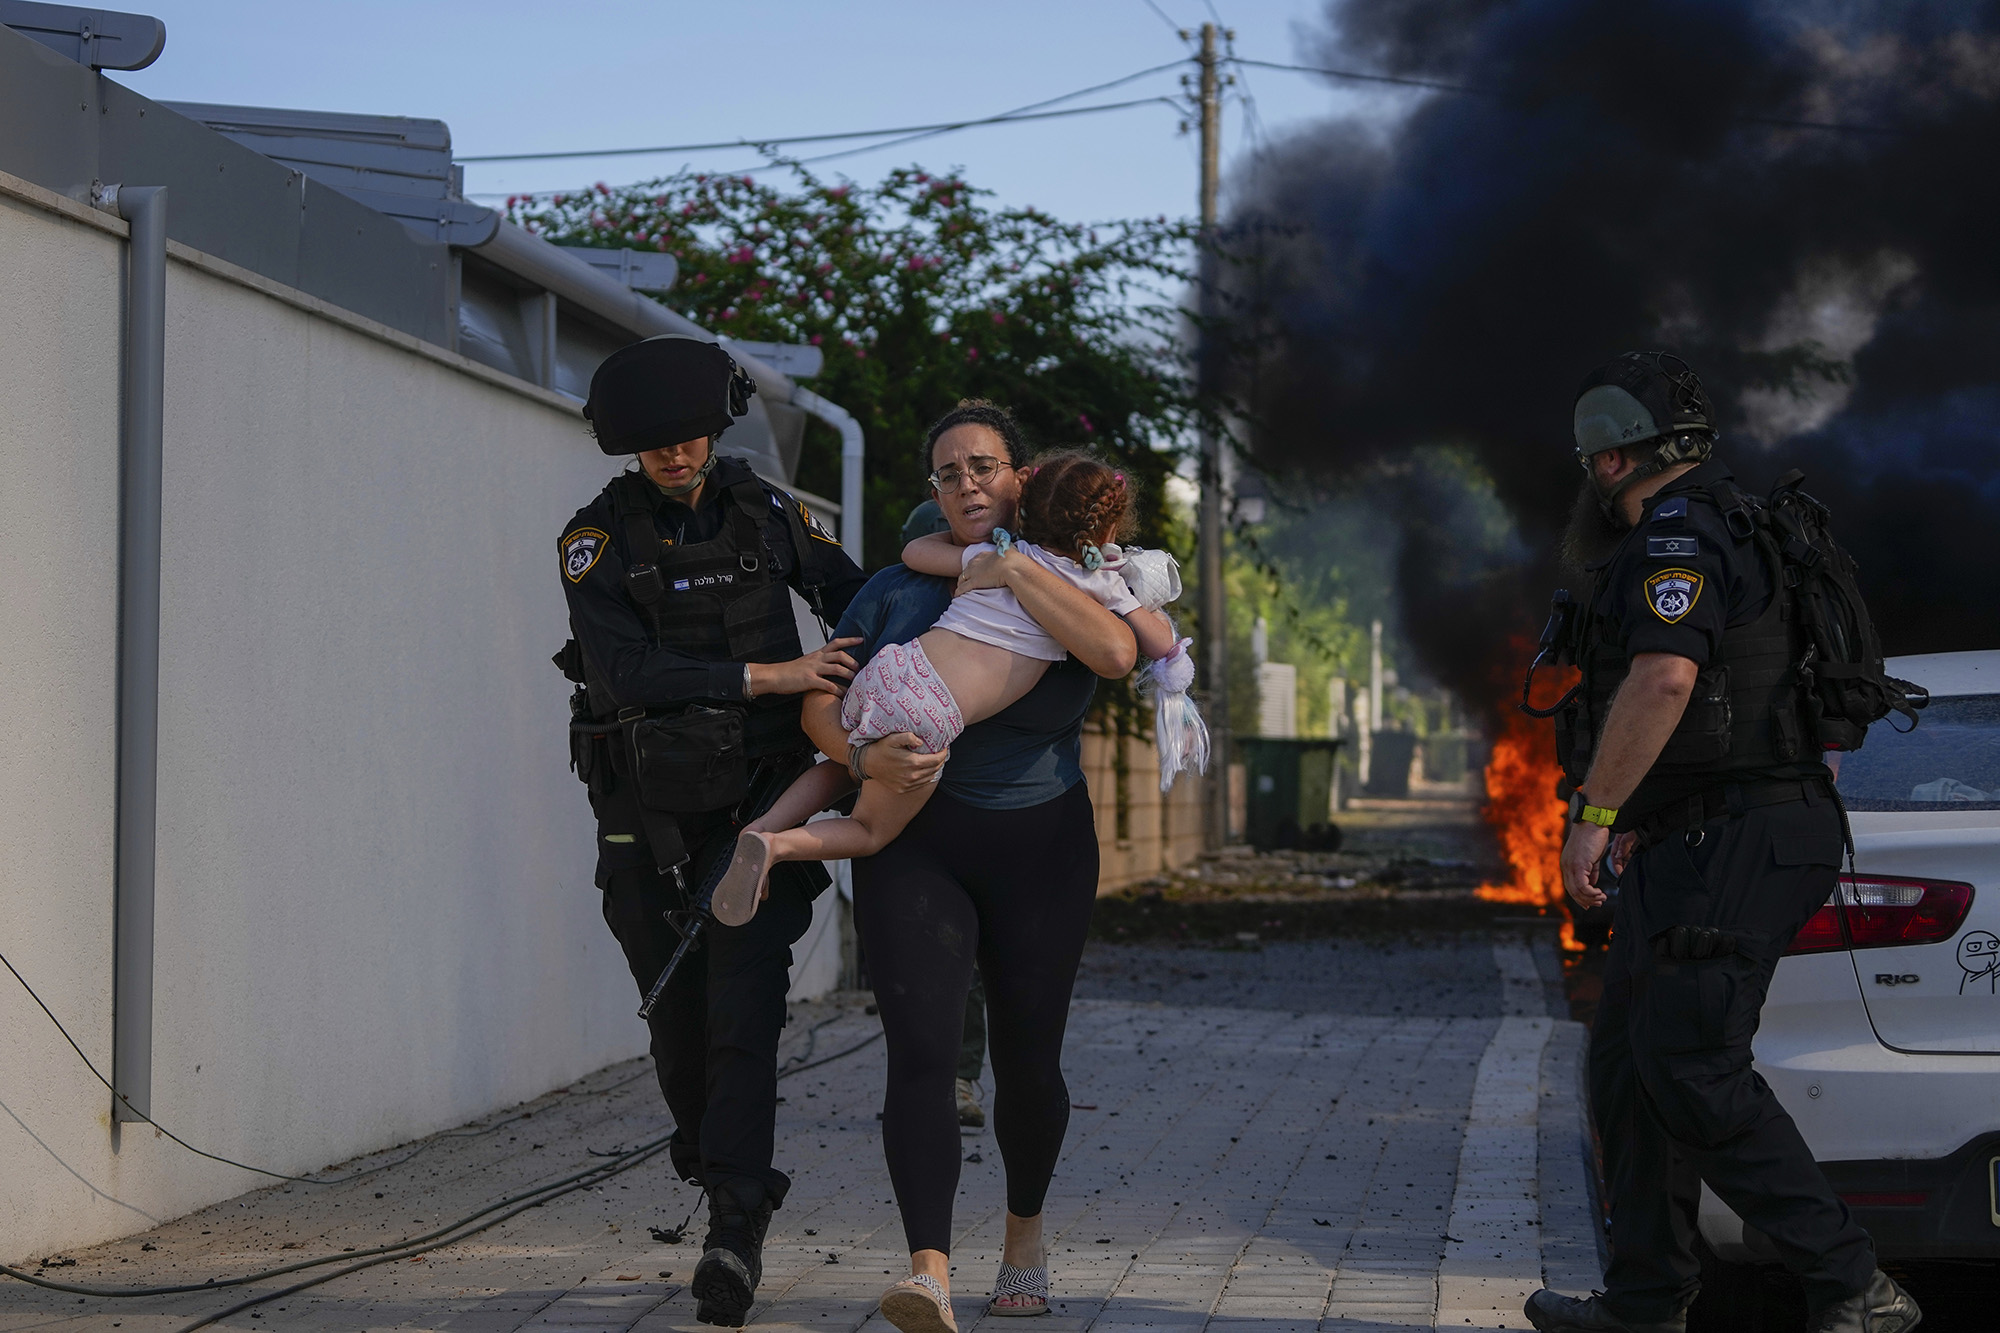 Israeli police officers evacuate a woman and a child from a site hit by a rocket fired from Gaza, in Ashkelon, southern Israel, on October 7.